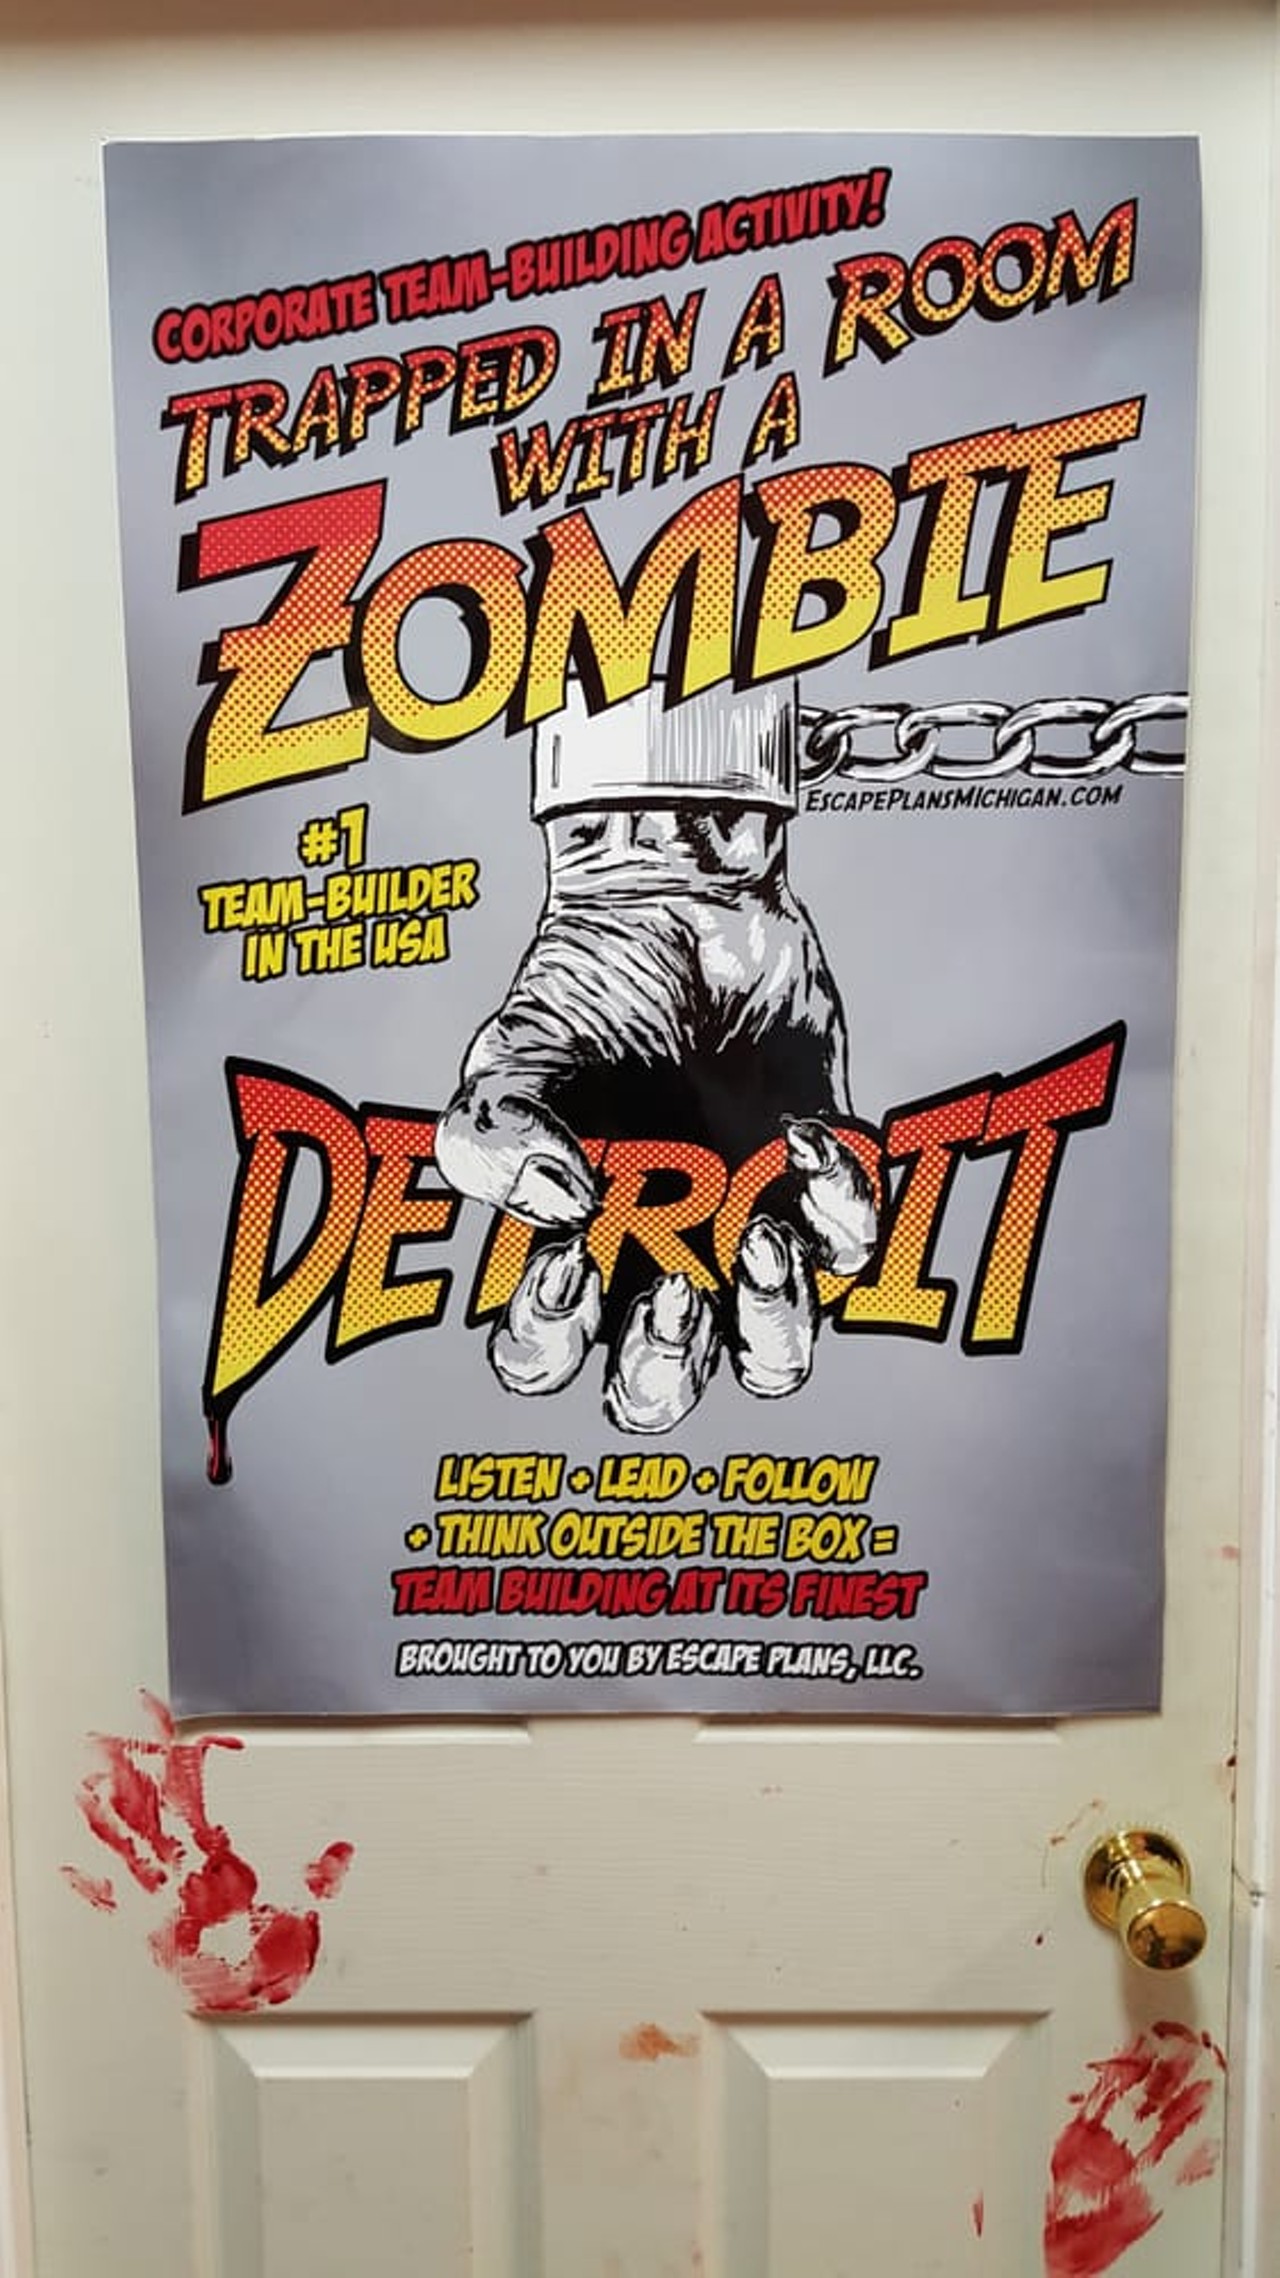 Try to escape from being Trapped in a Room with a Zombie
Penobscot Building, 645 Griswold St. #227, Detroit; 248-527-3977
The name pretty much says it all. You&#146;re trapped in a room with a zombie, and you have 60 minutes to escape. The tickets are $28 per person, so this date won&#146;t cost you an arm and a leg. Well, only if you&#146;re able to make it out of the room on time.
Photo via Yelp user, Keith R.